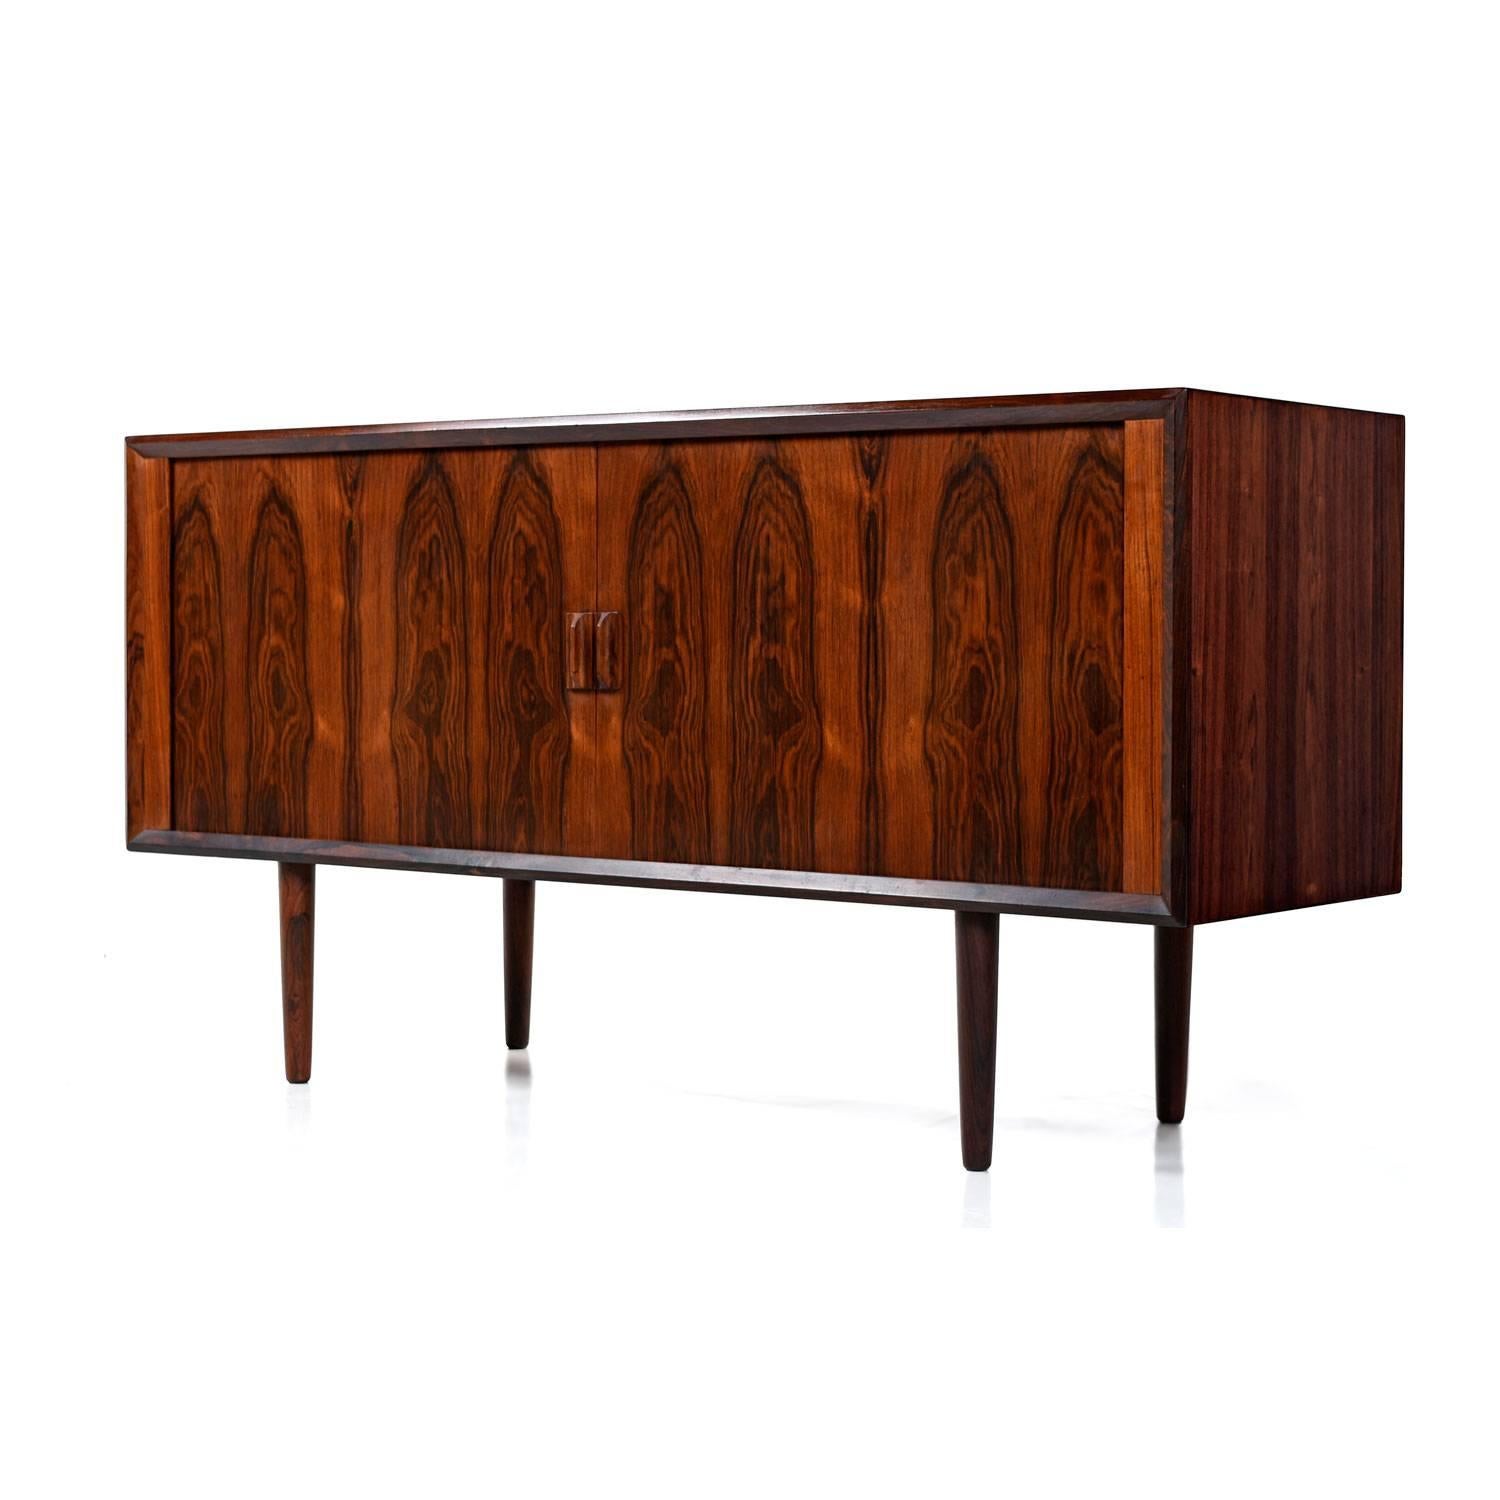 The rich, oxblood colored rosewood is the high water mark of Scandinavian cabinet making. Notice the wild, flaring, cathedral grain. The old growth trees that supplied manufacturers during the mid-century are long gone. Matched grain pattern tambour